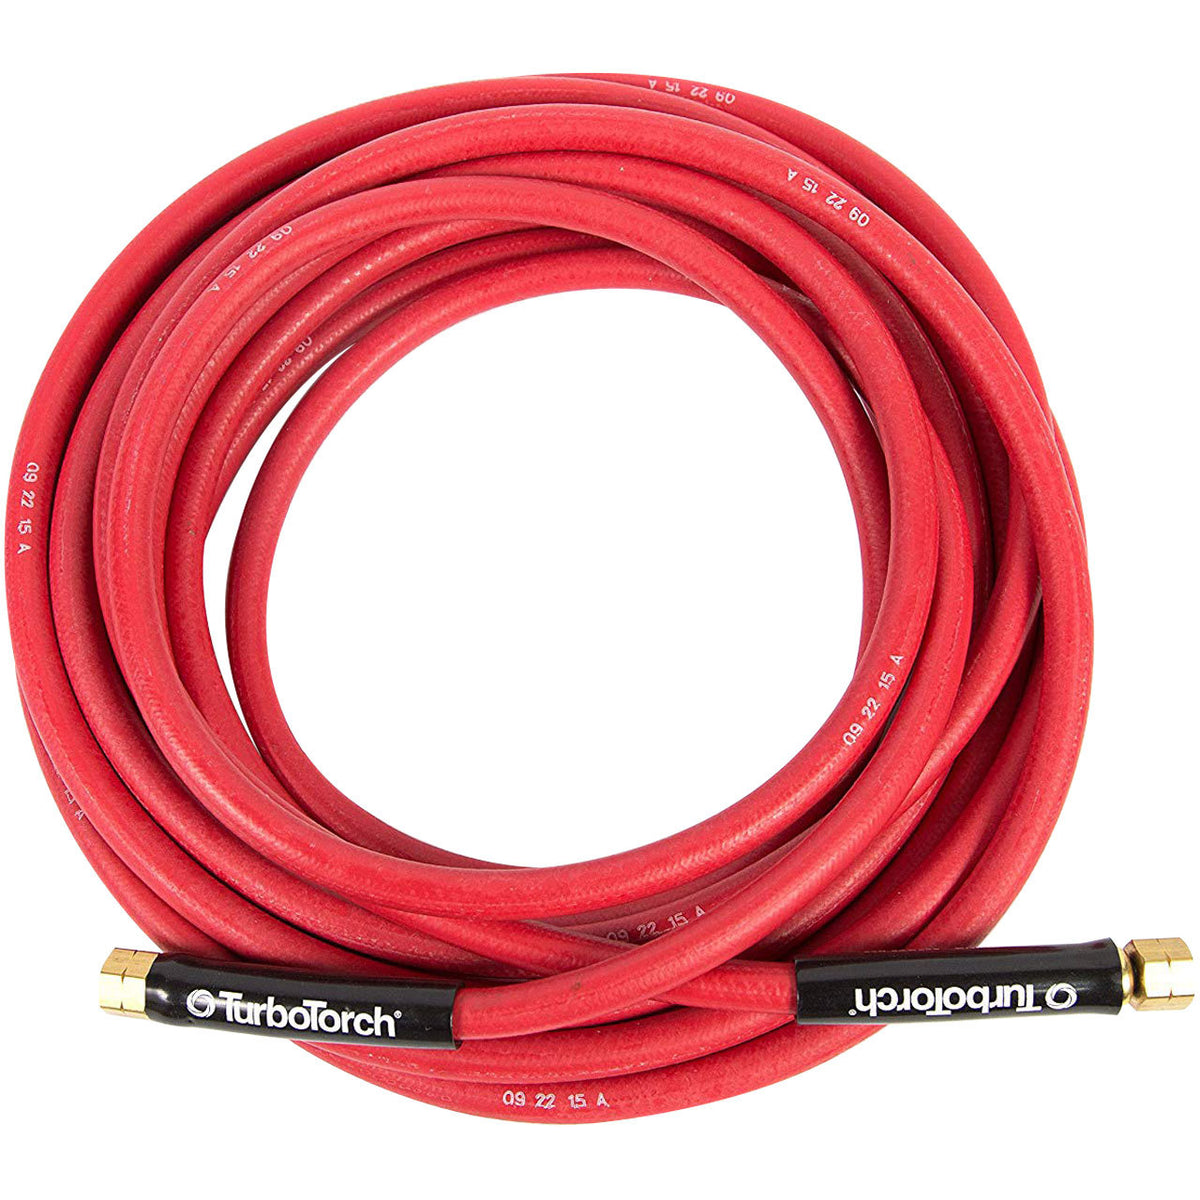 Replacement TurboTorch Hose